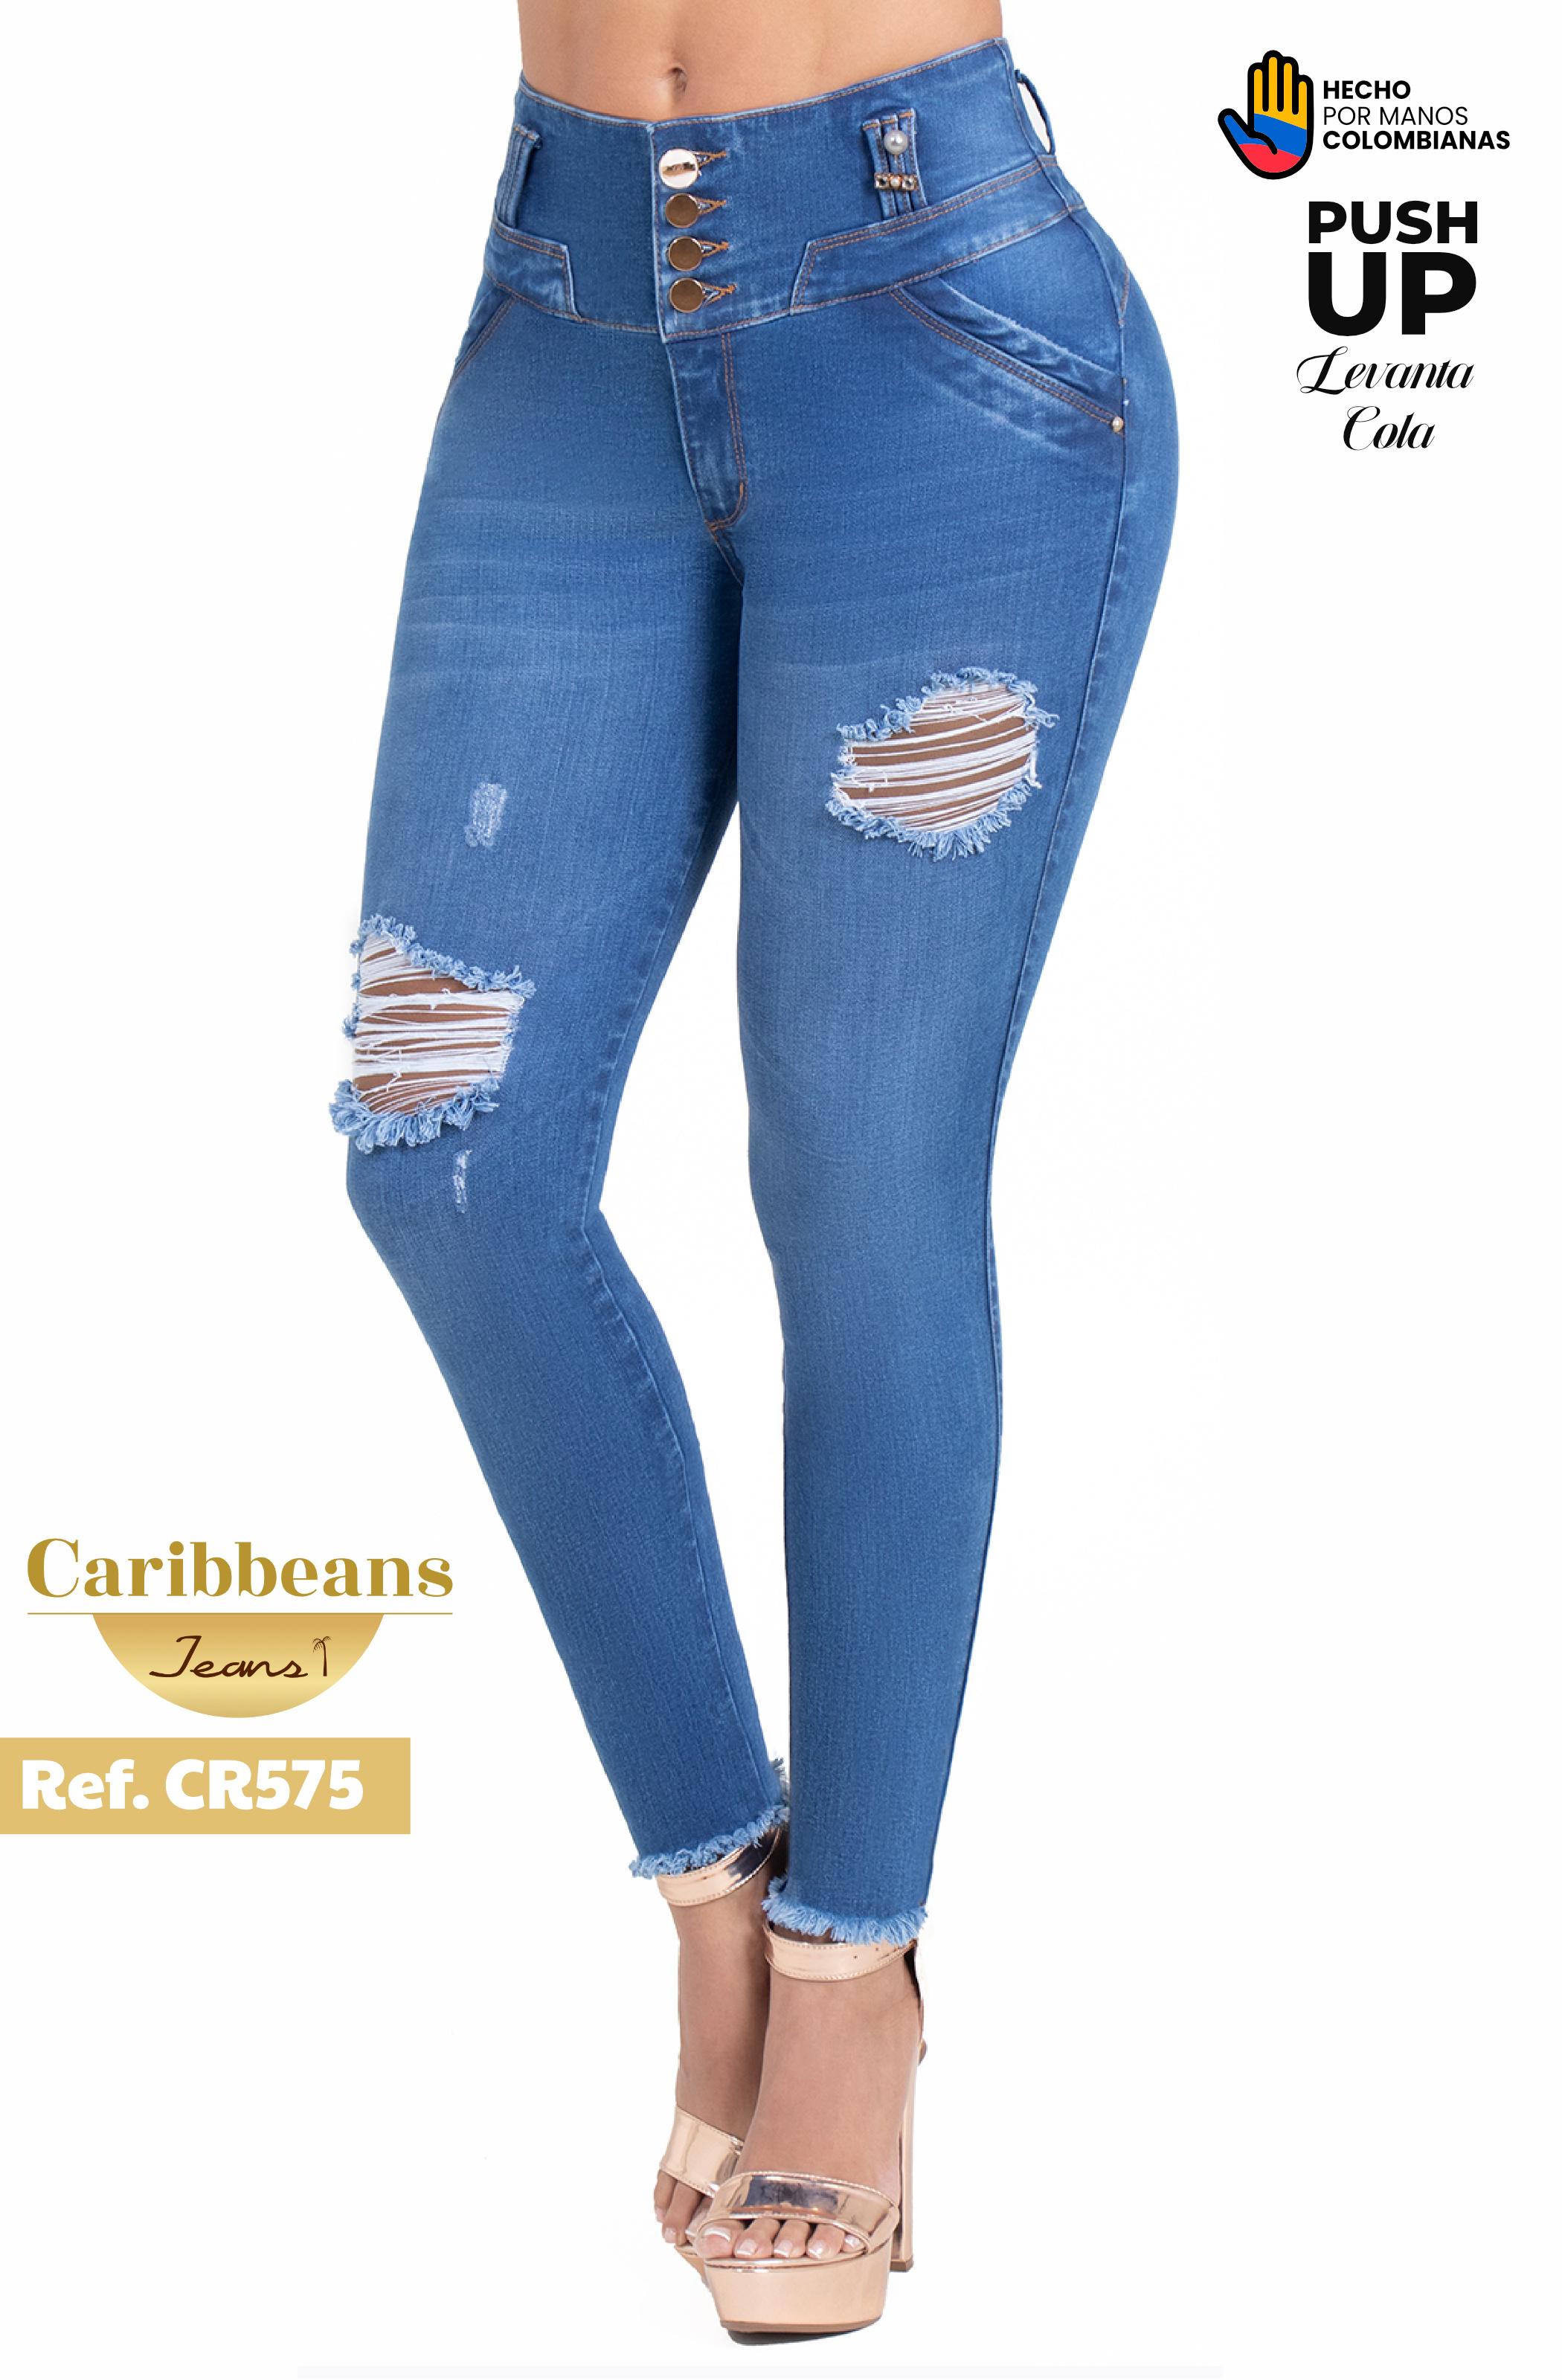 Comprar Jean Push Up Colombiano